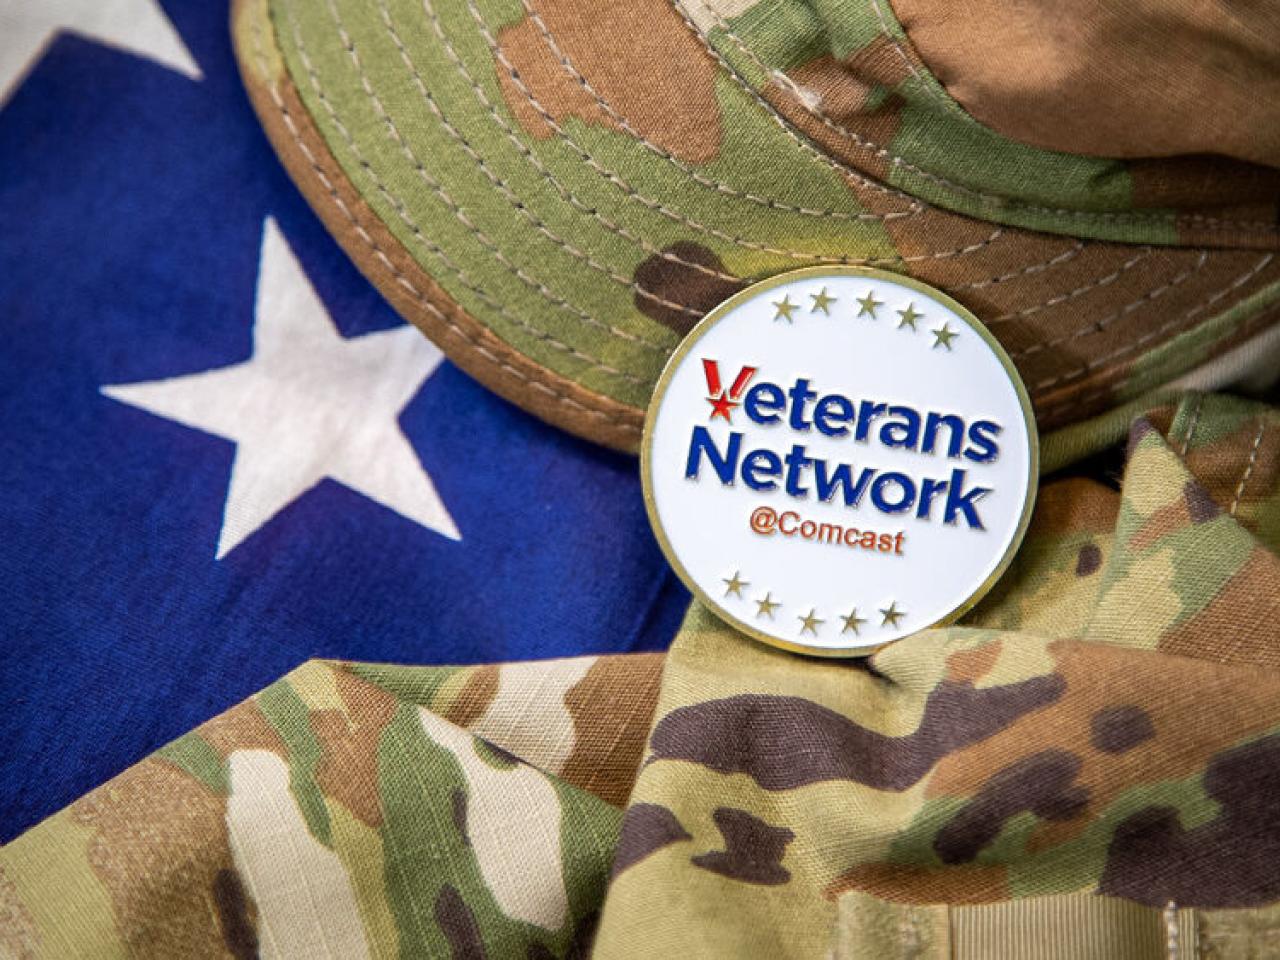 An american flag behind a camo patterned hat and shirt. A badge with "Veterans Network Comcast" on top.